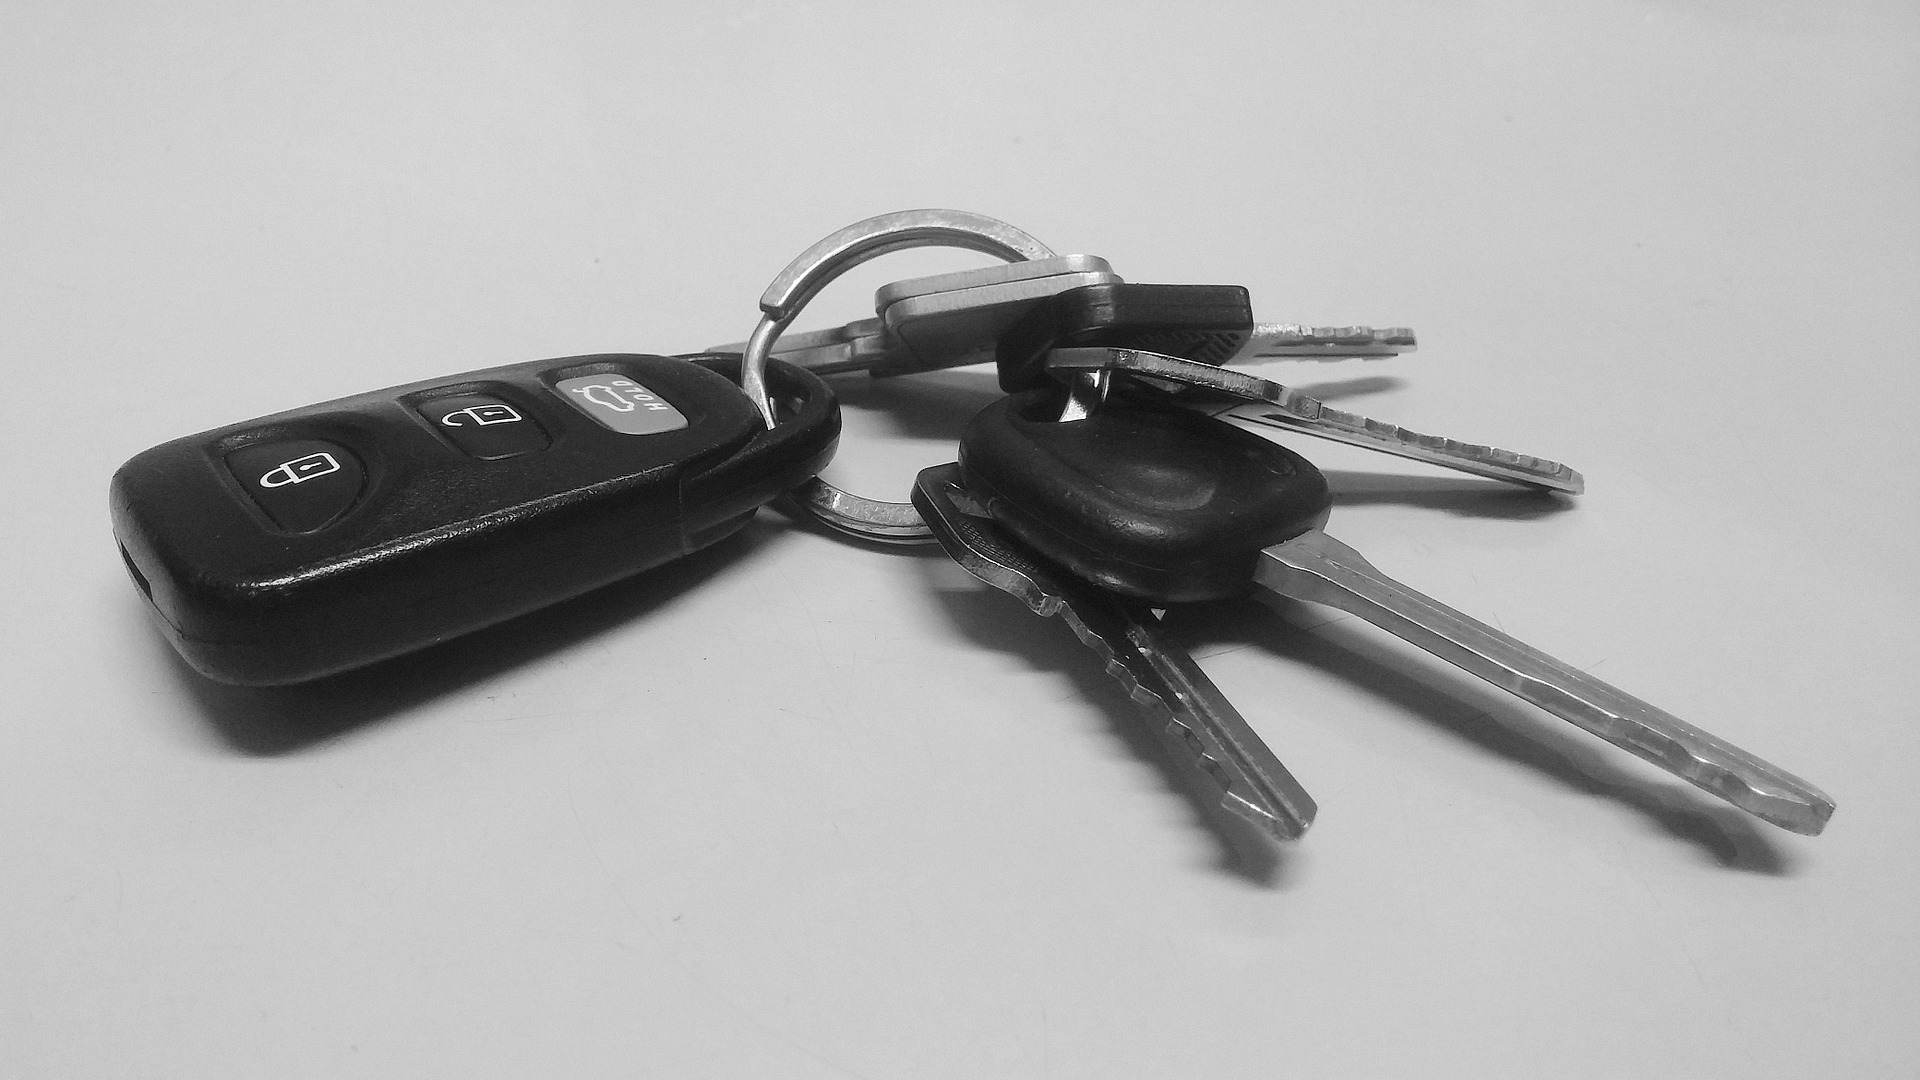 Datakeys car keys lost replacement 247 locksmith auto locksmith near me car key emergency car key specialist13 - Vehicle Towing and Recovery Services in essex are the best